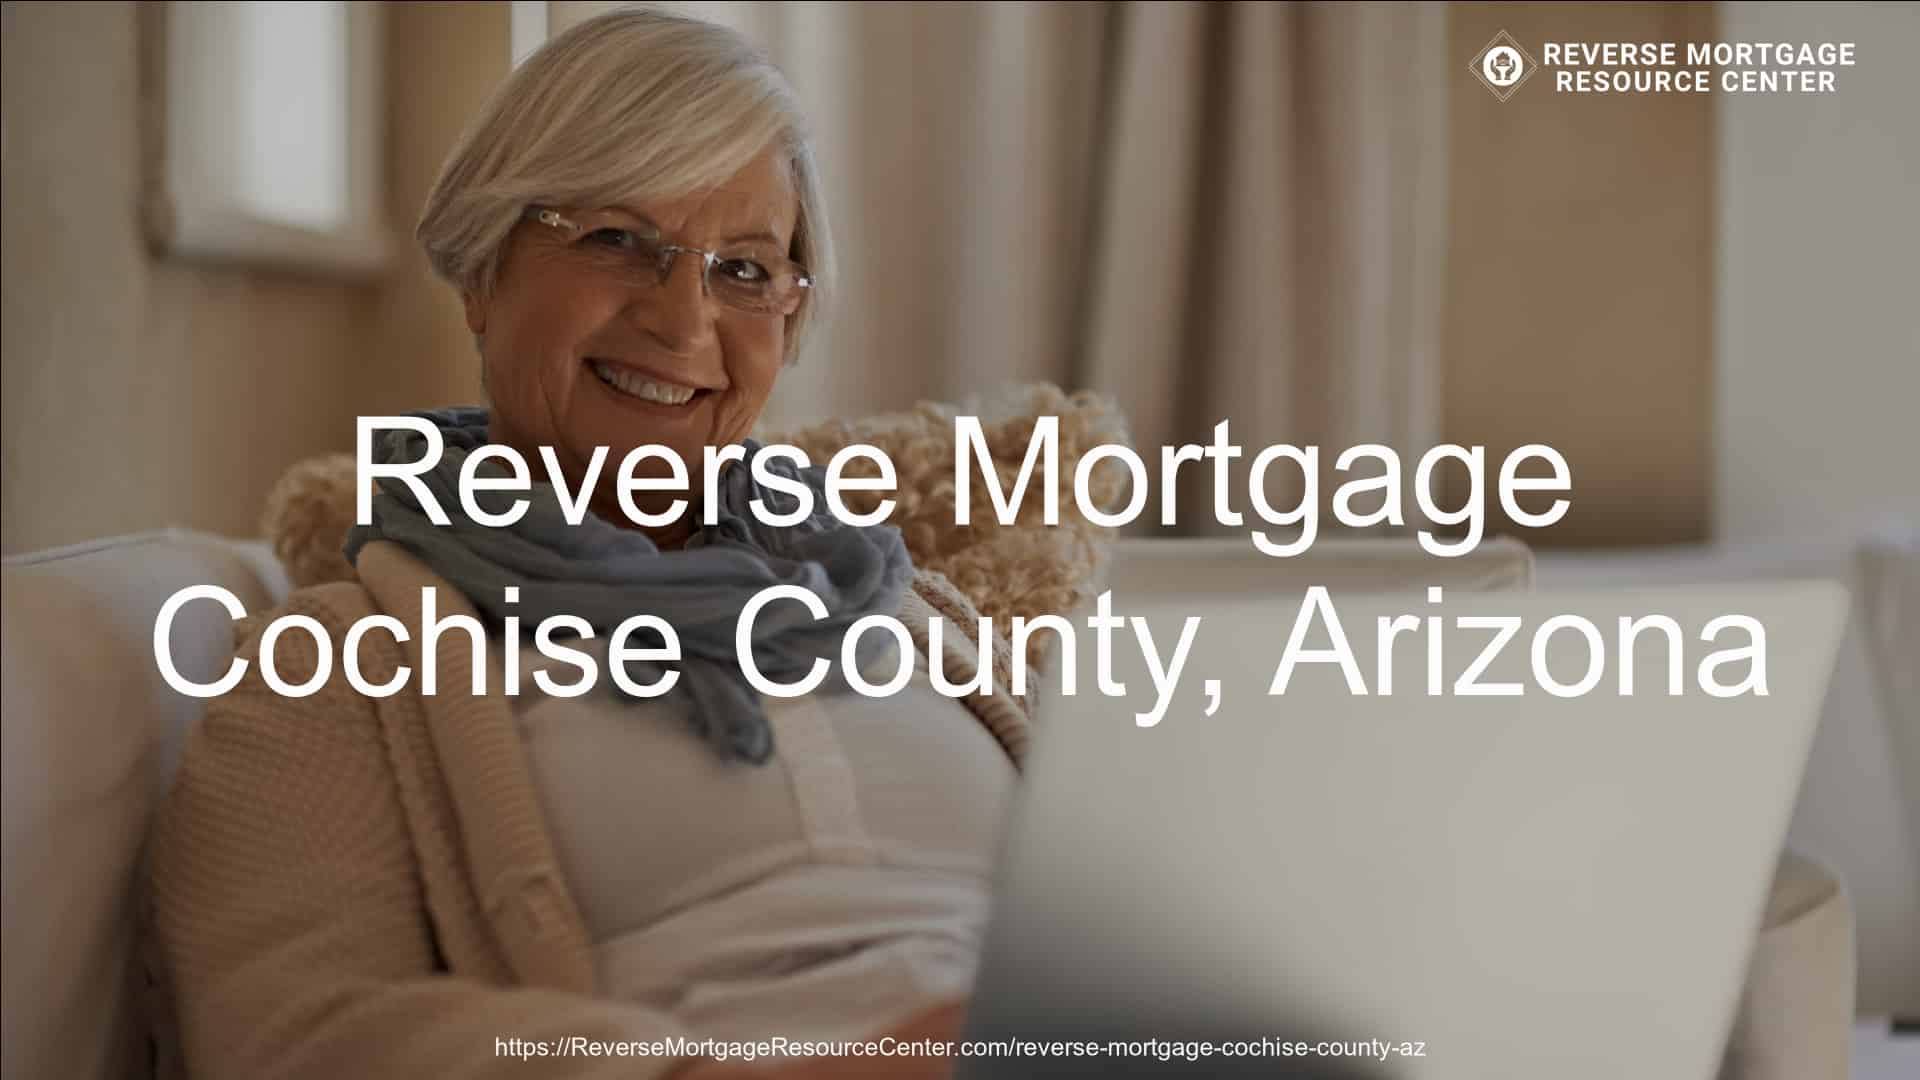 Reverse Mortgage Loans in Cochise County Arizona